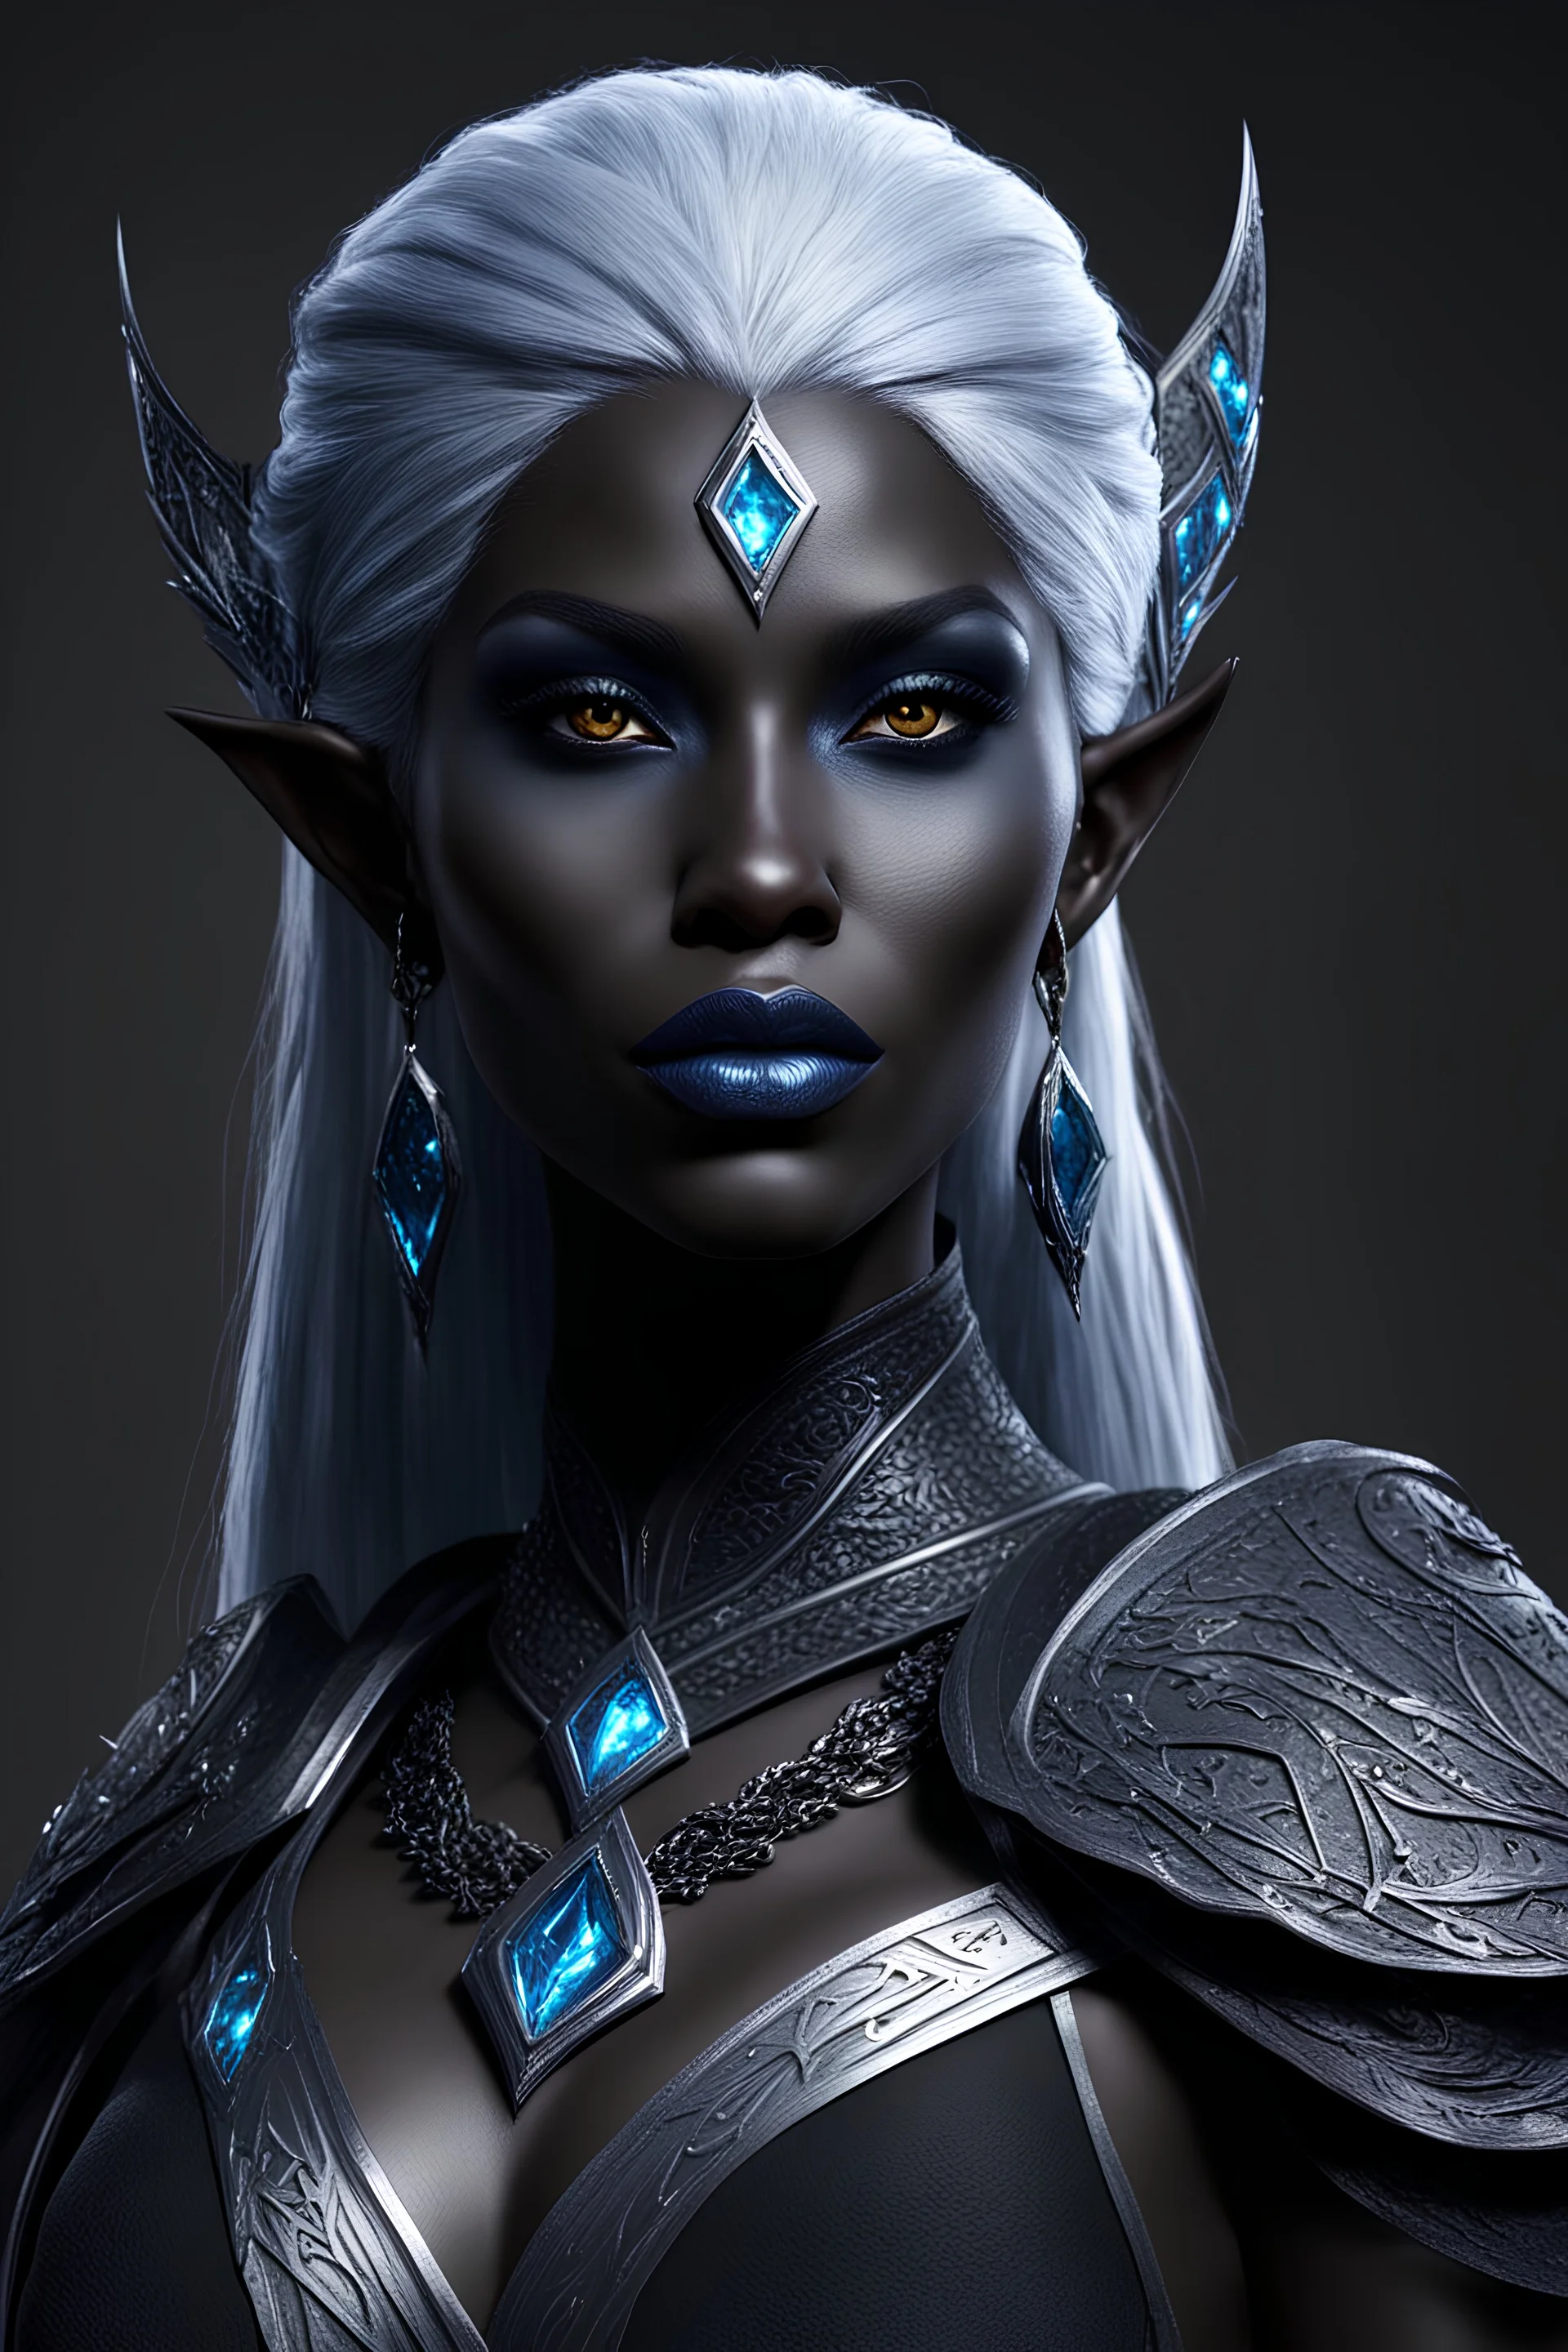 dnd character art of a drow sorceress. high resolution cgi, 4k, ears, dark-charcoal-black skin, unreal engine 6, high detail, cinematic.